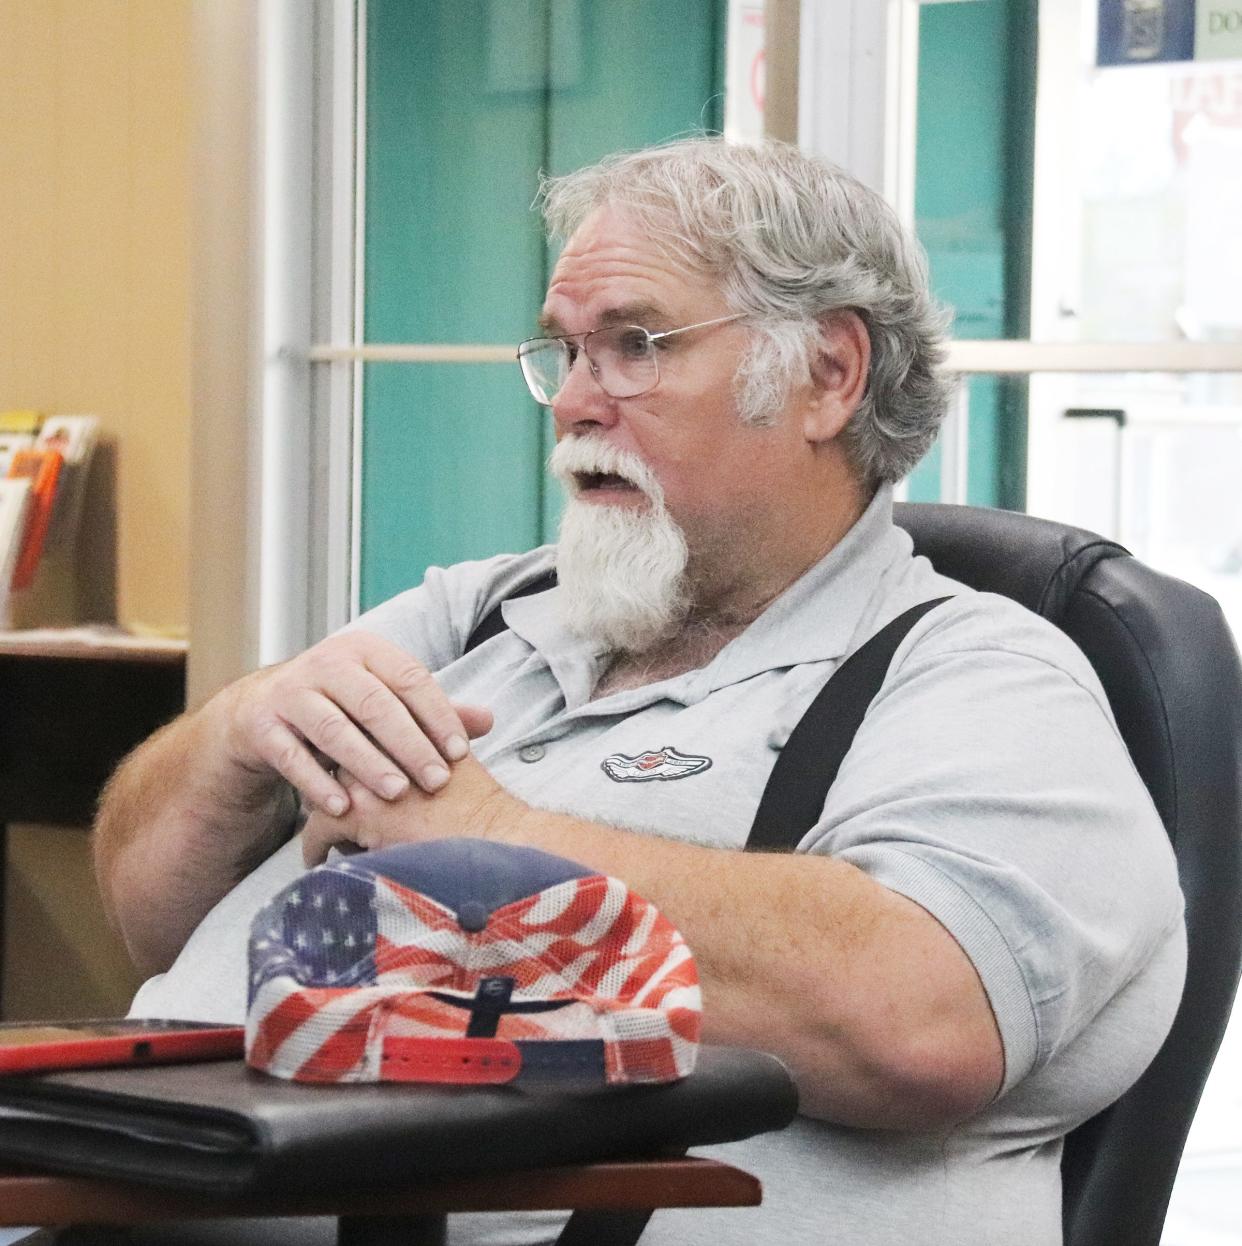 Dwayne Price, shown here at a Chenoa City Council meeting in April 2021, has been named to replace Joseph Bell as Streets Commissioner. Bell officially resigned from his position at the May 10 meeting. He took over from Price at this April 2021 meeting after winning the April 2021 election.